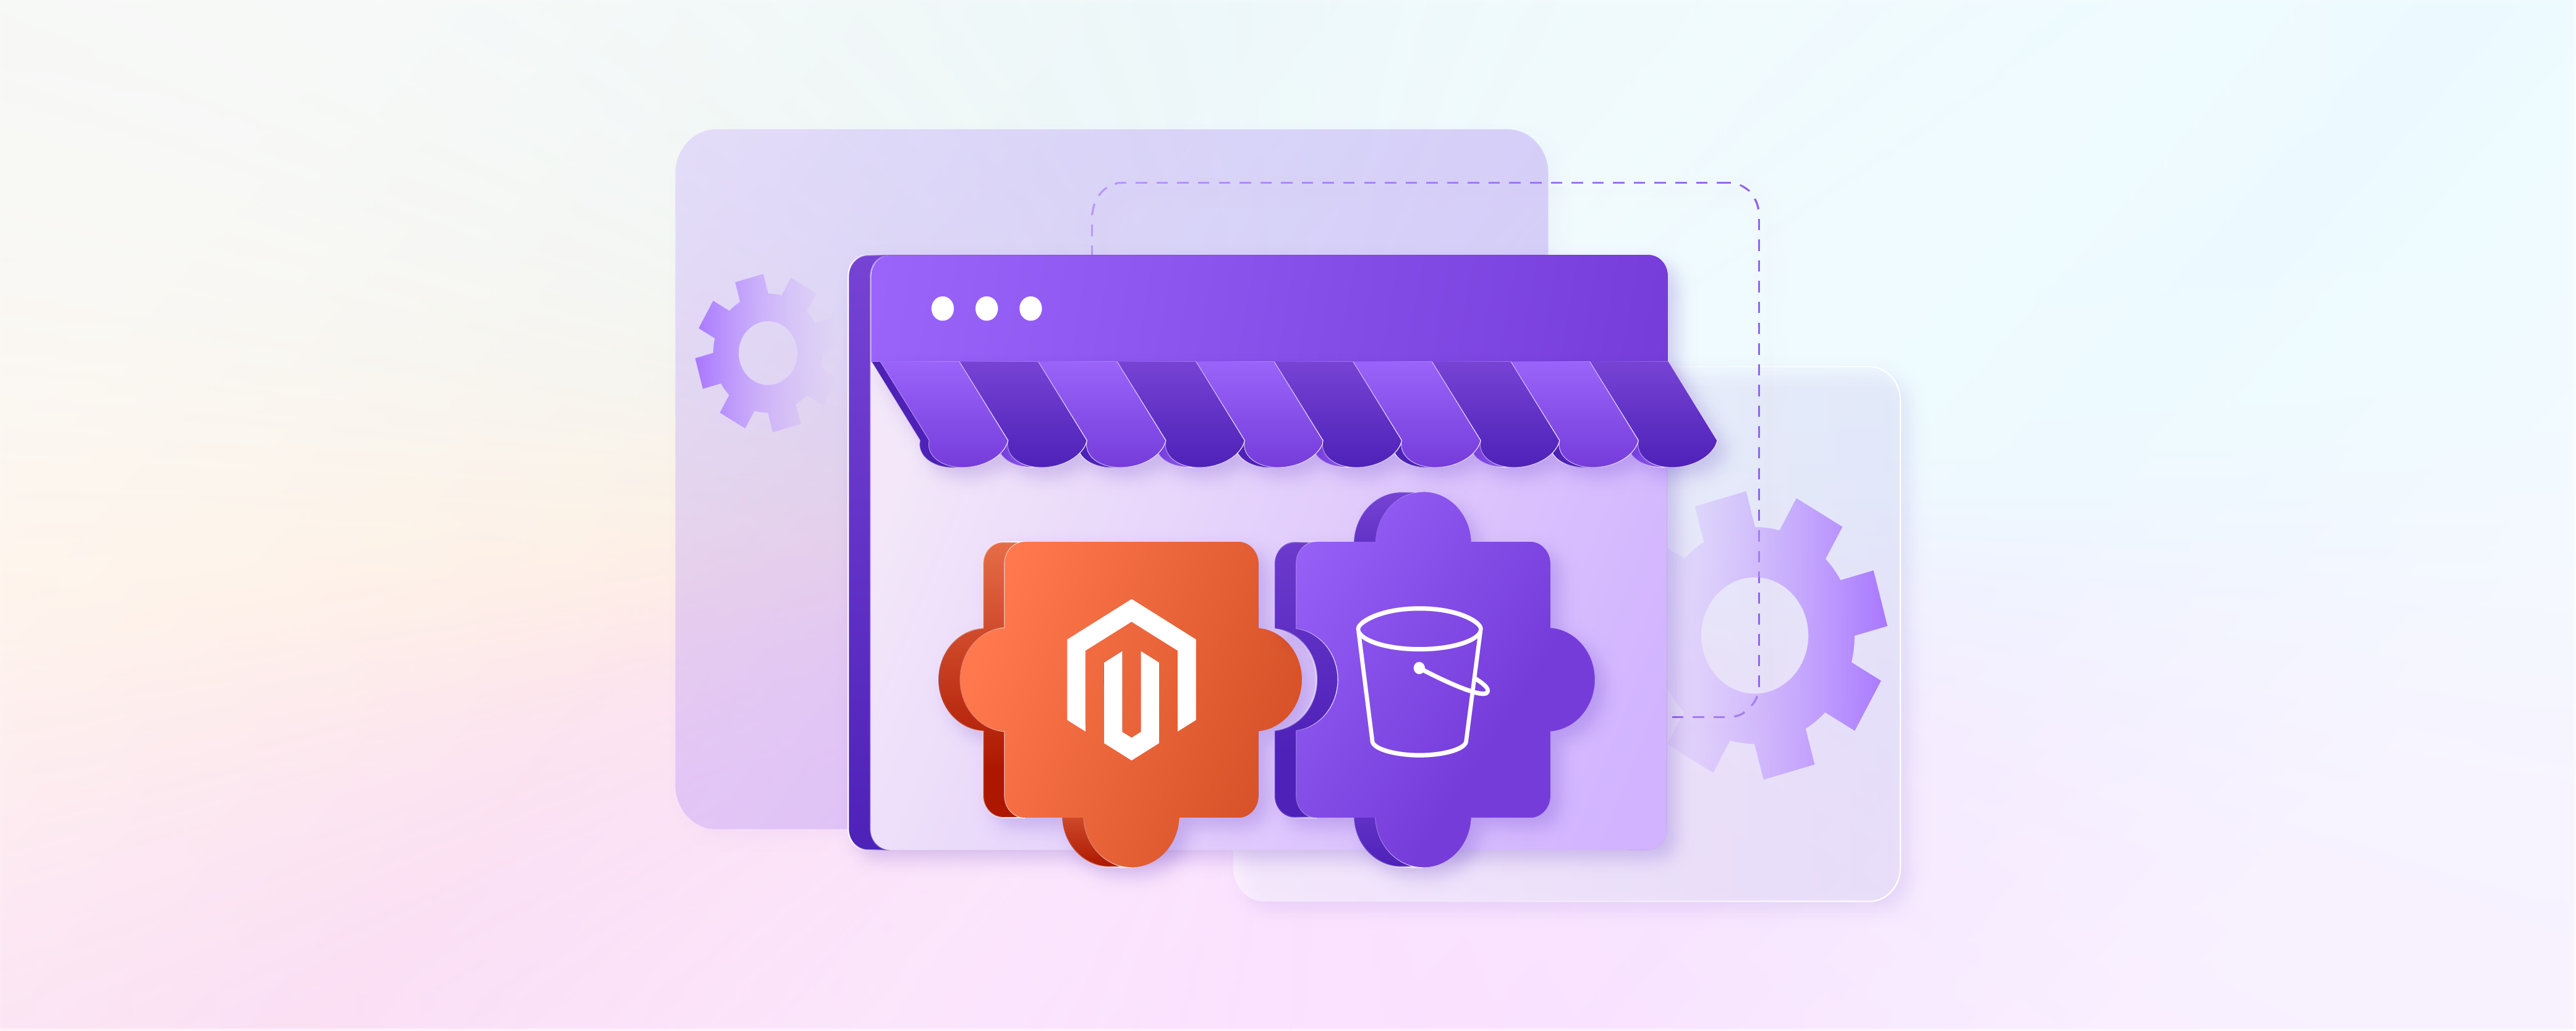 How to Configure and Migrate Magento AWS S3 Extension?